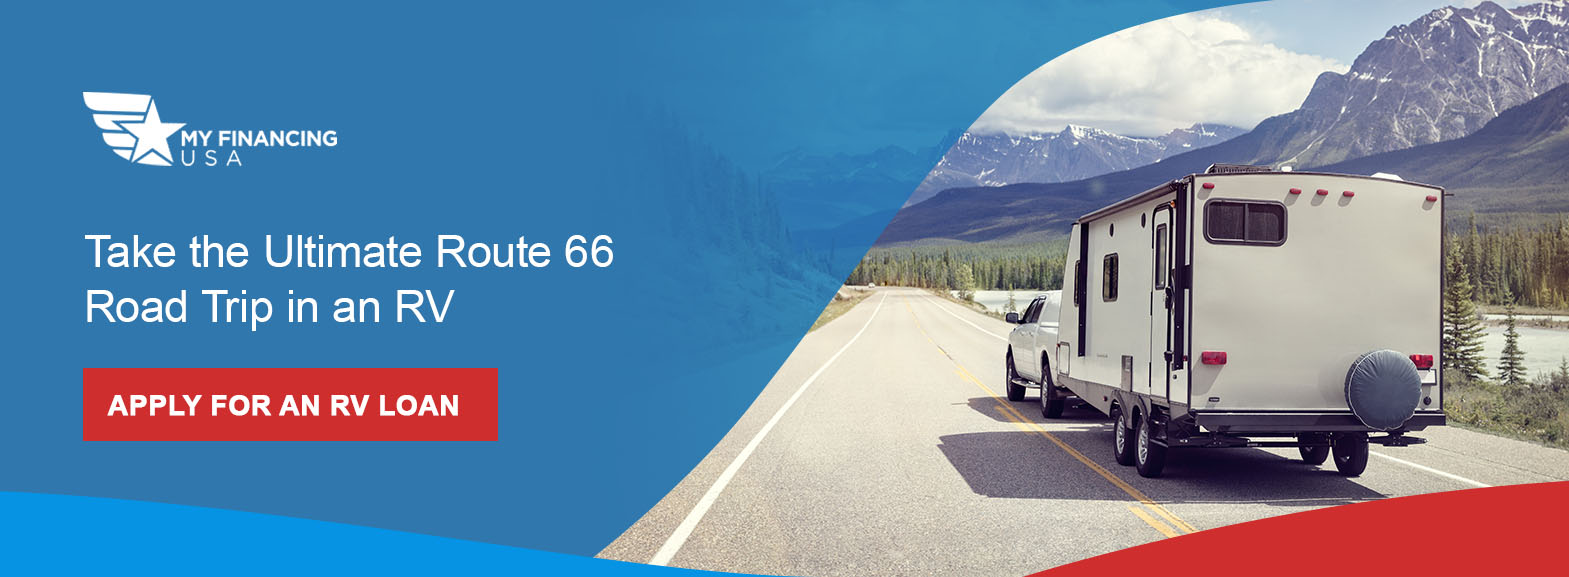 Take the Ultimate Route 66 Road Trip in an RV. Apply for an RV Loan!